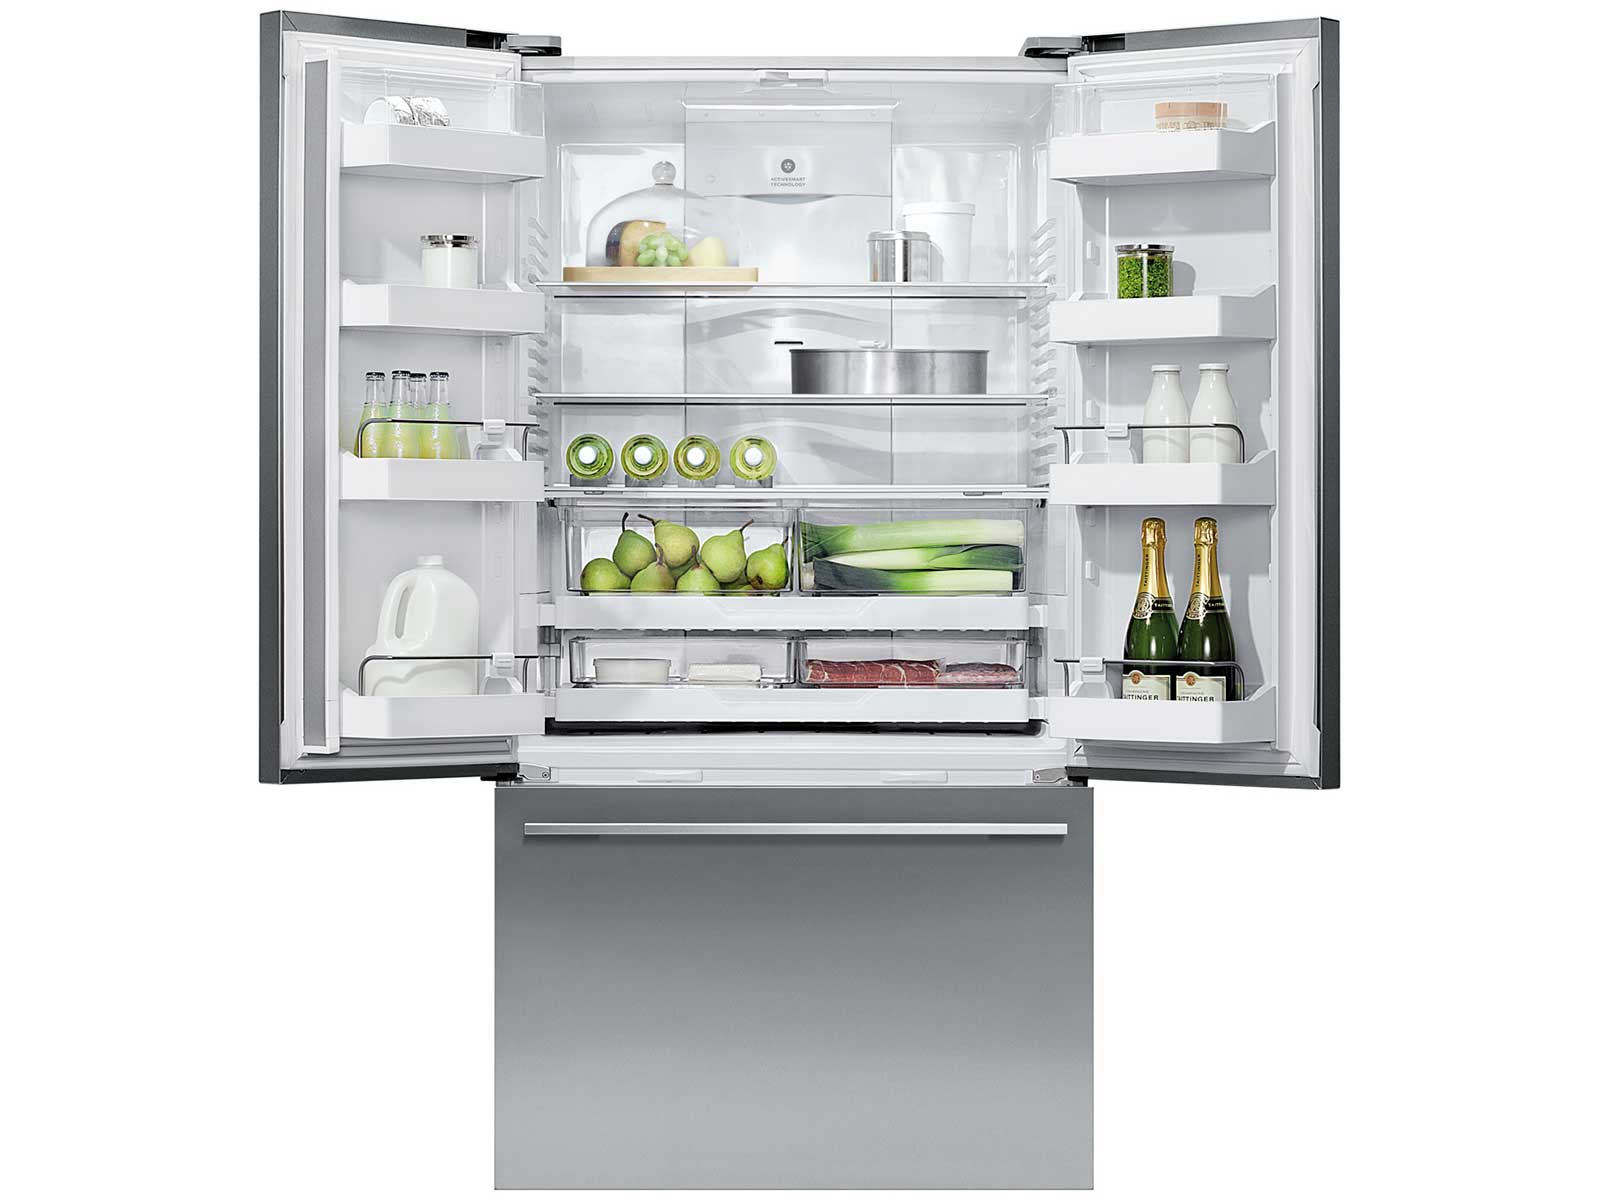 Refrigeration sales tips from Fisher & Paykel, plus a money back ...